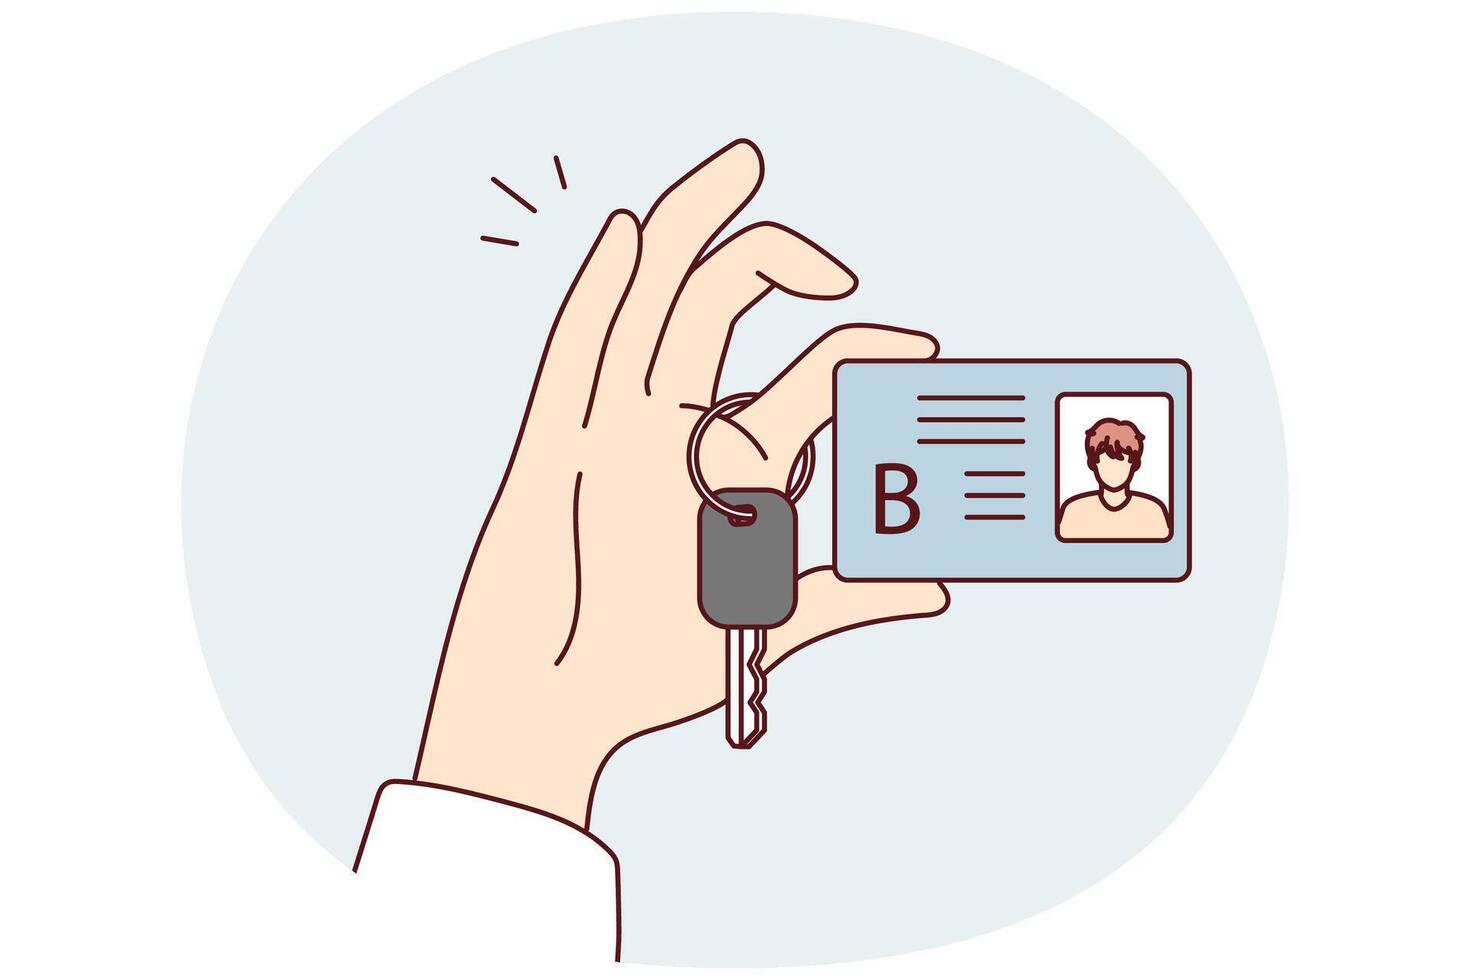 Category B car license with photo and truck ignition key in persons hand. Vector image